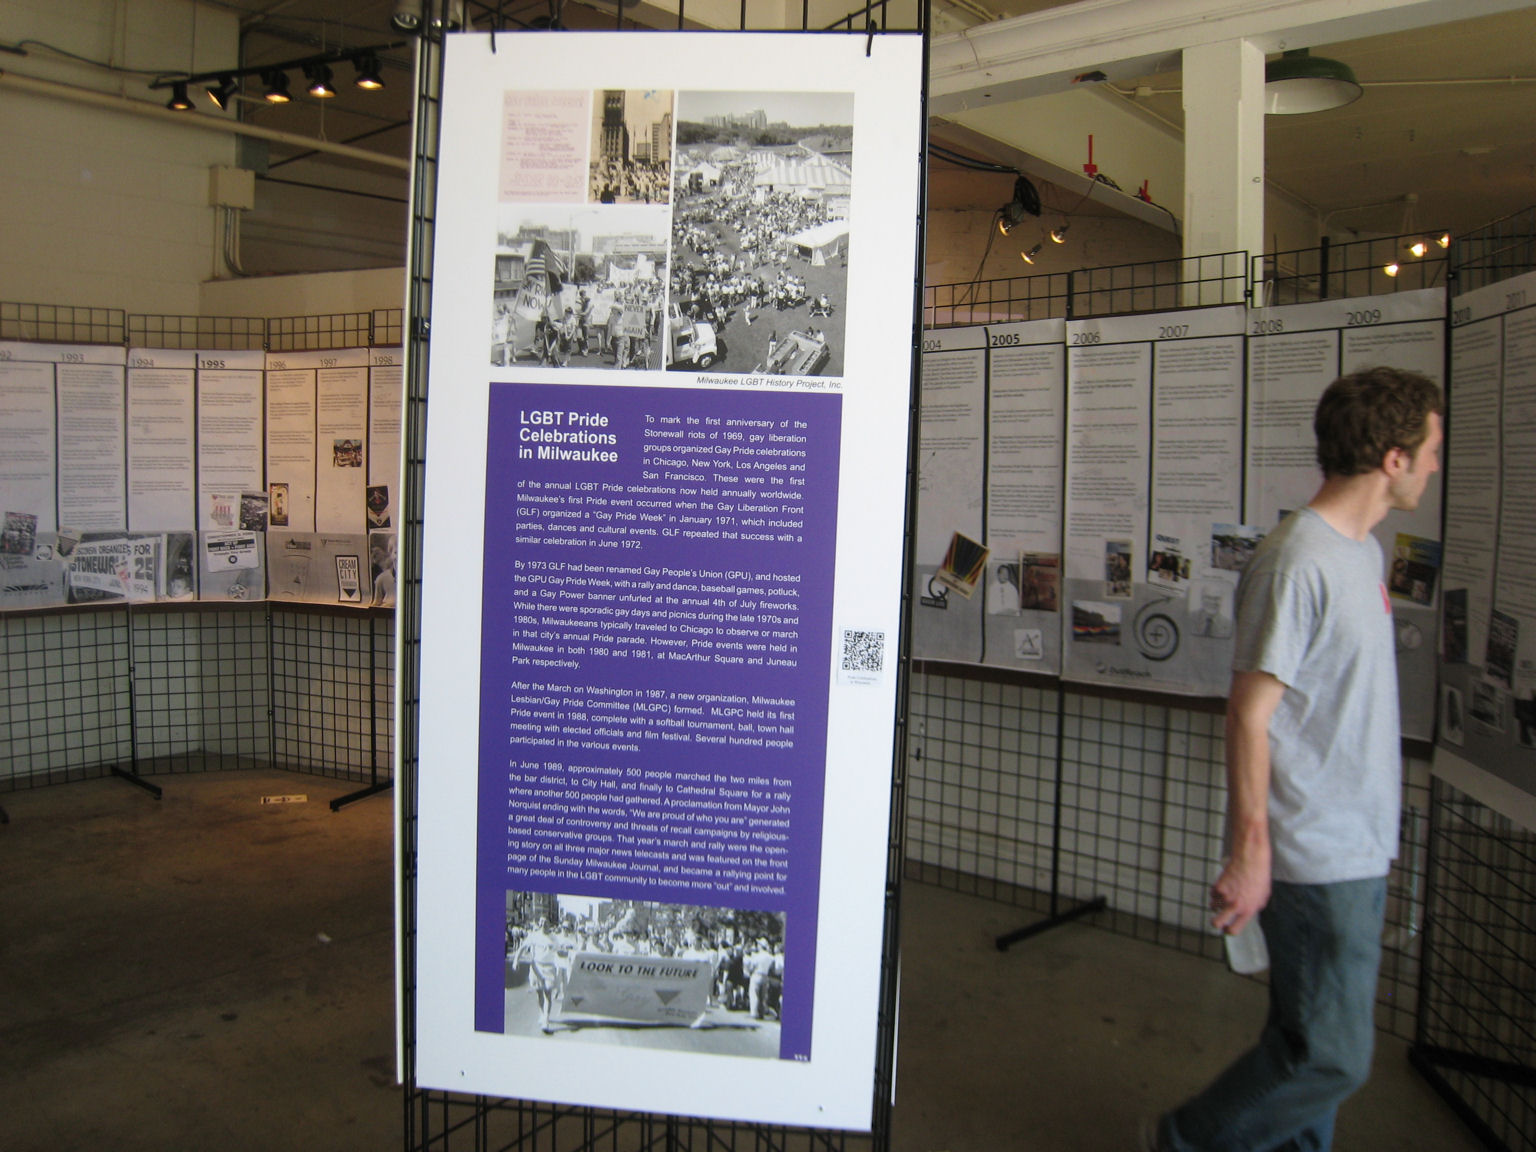 History Project at PrideFest 2012